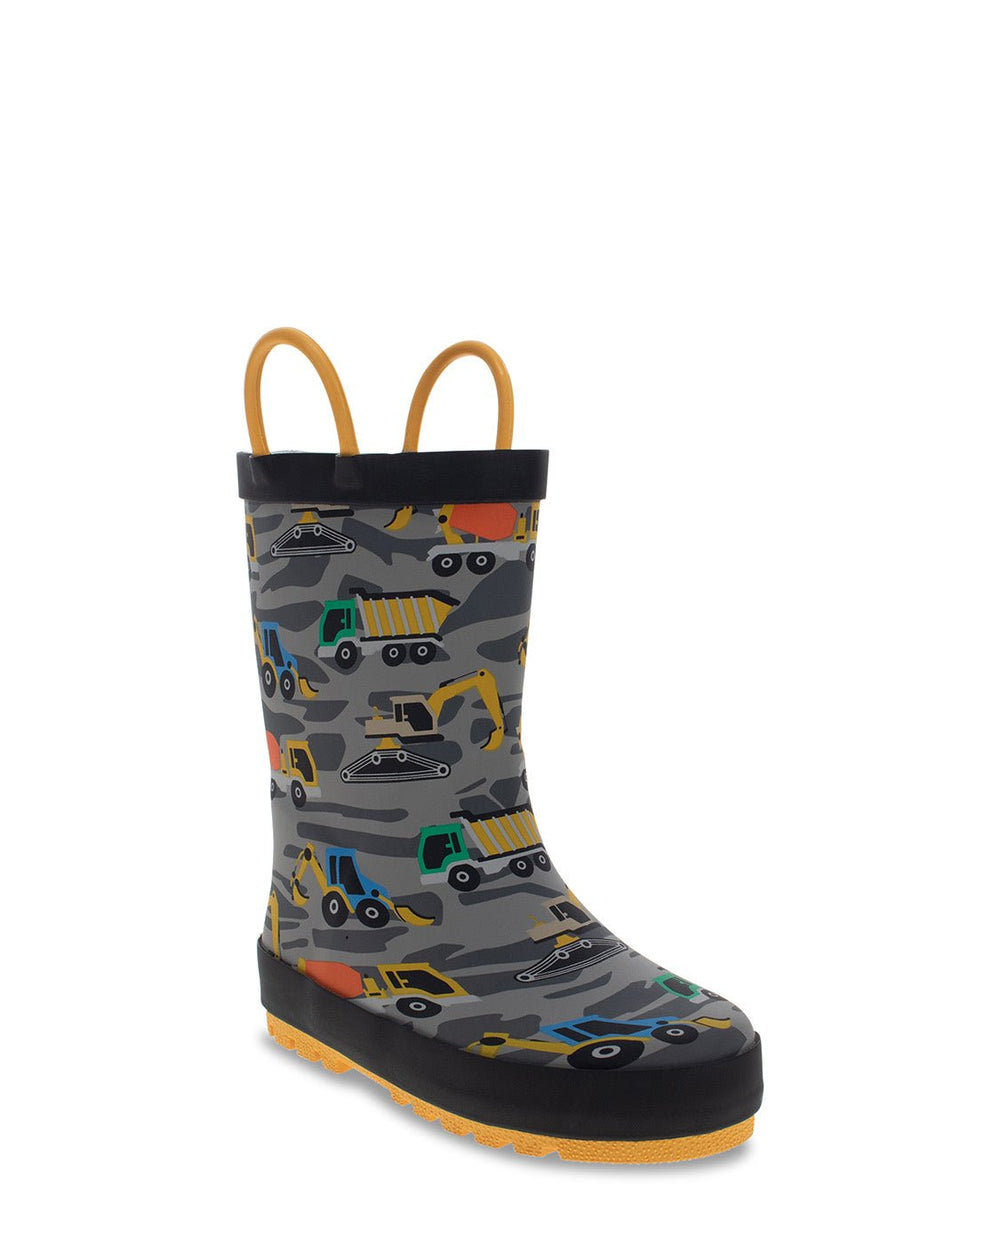 Toddler Rain Boots for Girls, Rain Boots for Boys, Kids Rain Boots, Boys  Rain Boots, Rain Boots Kids, Toddler Boy Rain Boots, Toddler Girl Rain  Boots